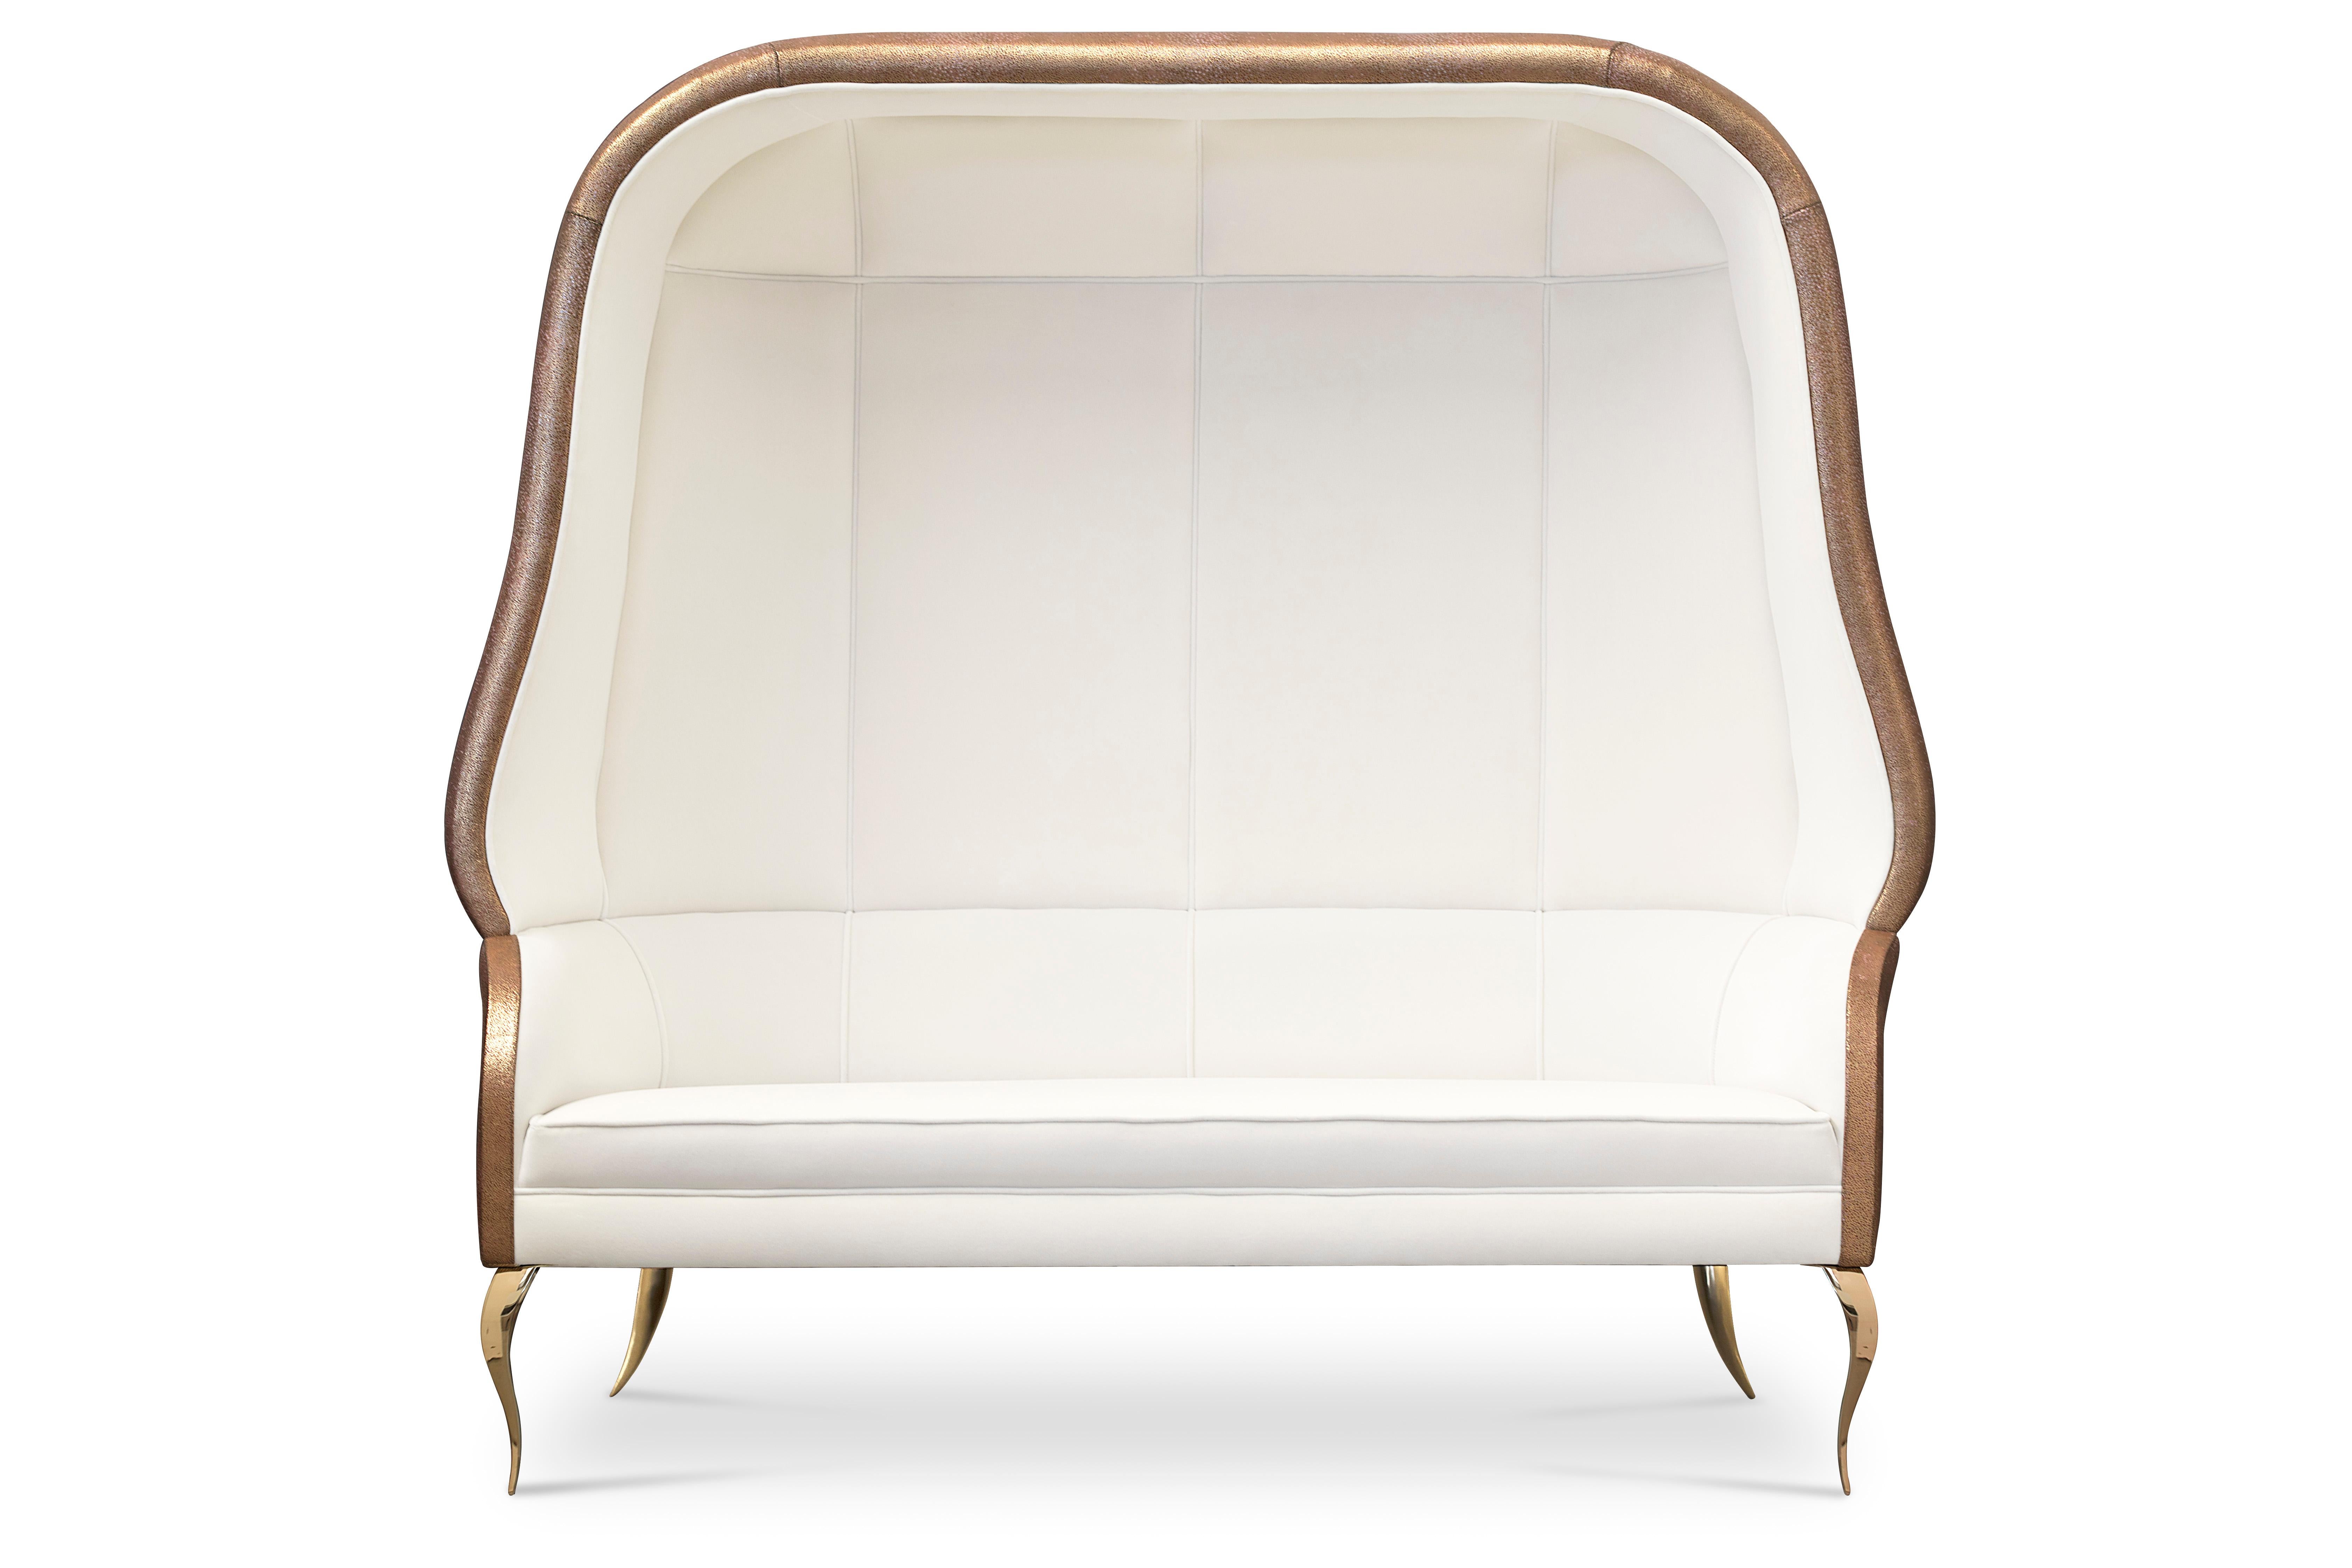 As a tribute to Dorothy Draper‘s high style we took the Classic Drapesse chair and added a bit of the Koket lavish & sensuous edge. Complete with a flirty new makeover, her exterior is adorned with our watercolor Terra leather transitioning to a